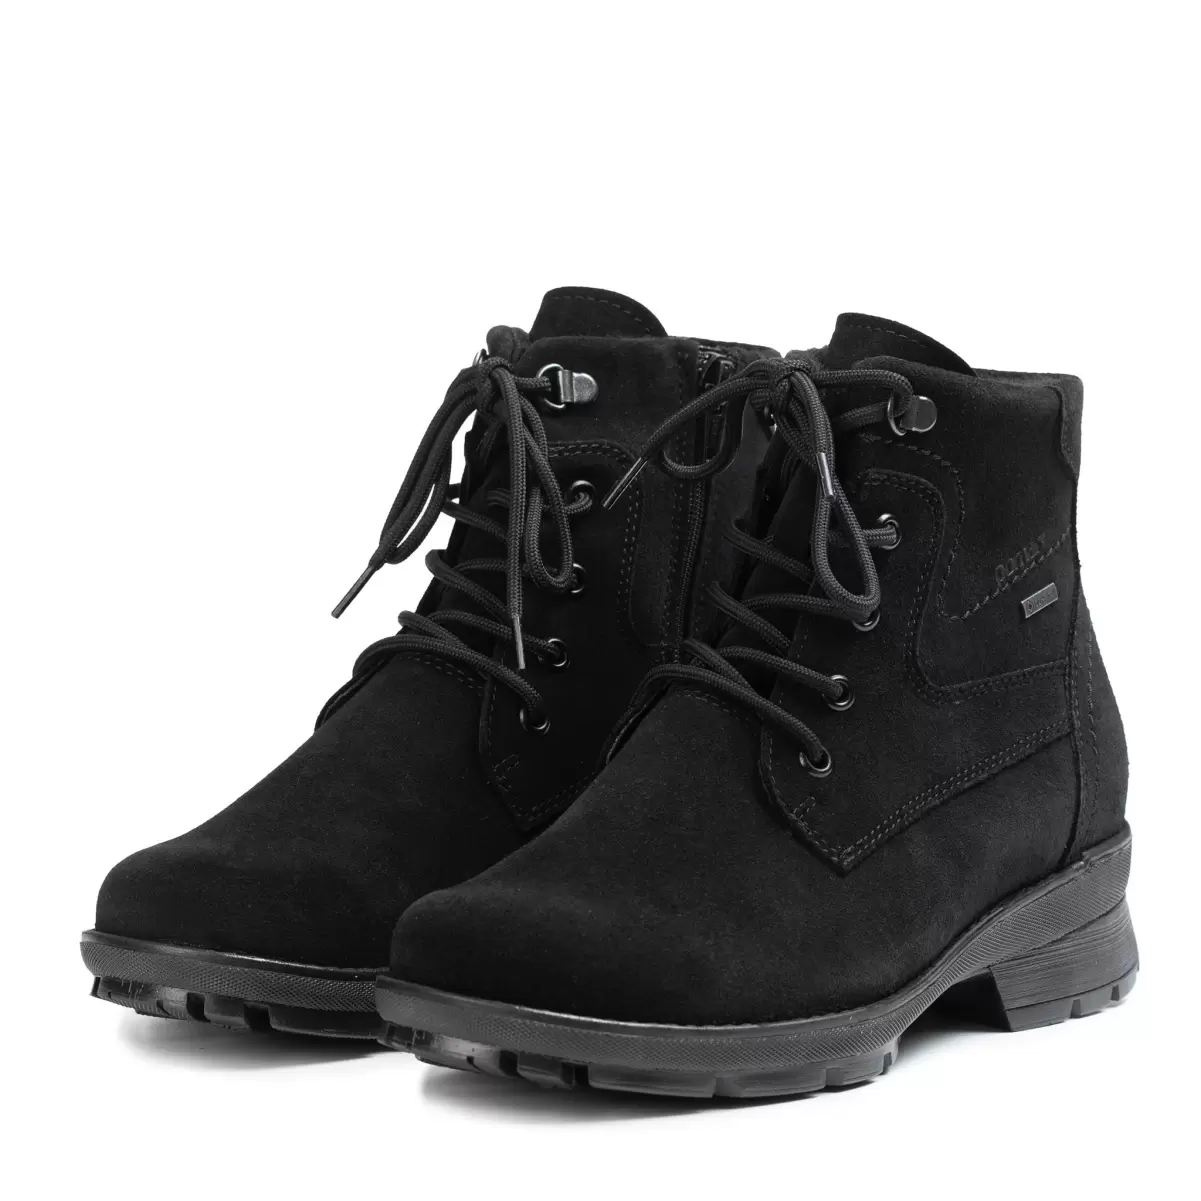 Black Suede/Felt L. Lace-Up Pomarfin Oy Women Piisku Women's Gore-Tex Ankle Boot - 3